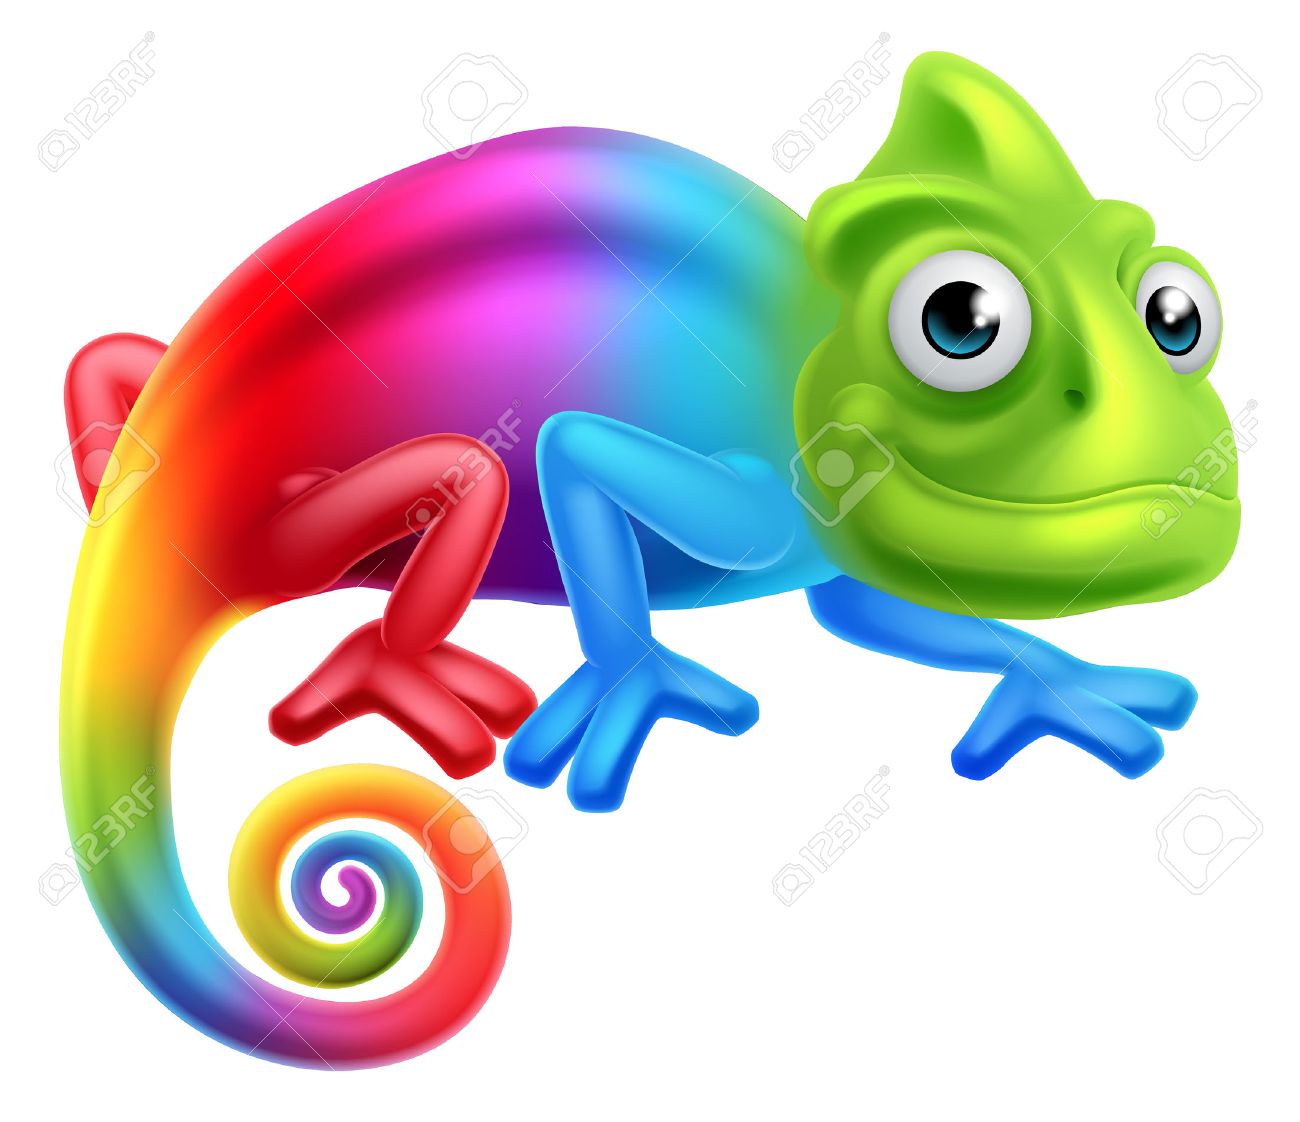 chameleon images clipart 10 free Cliparts | Download images on